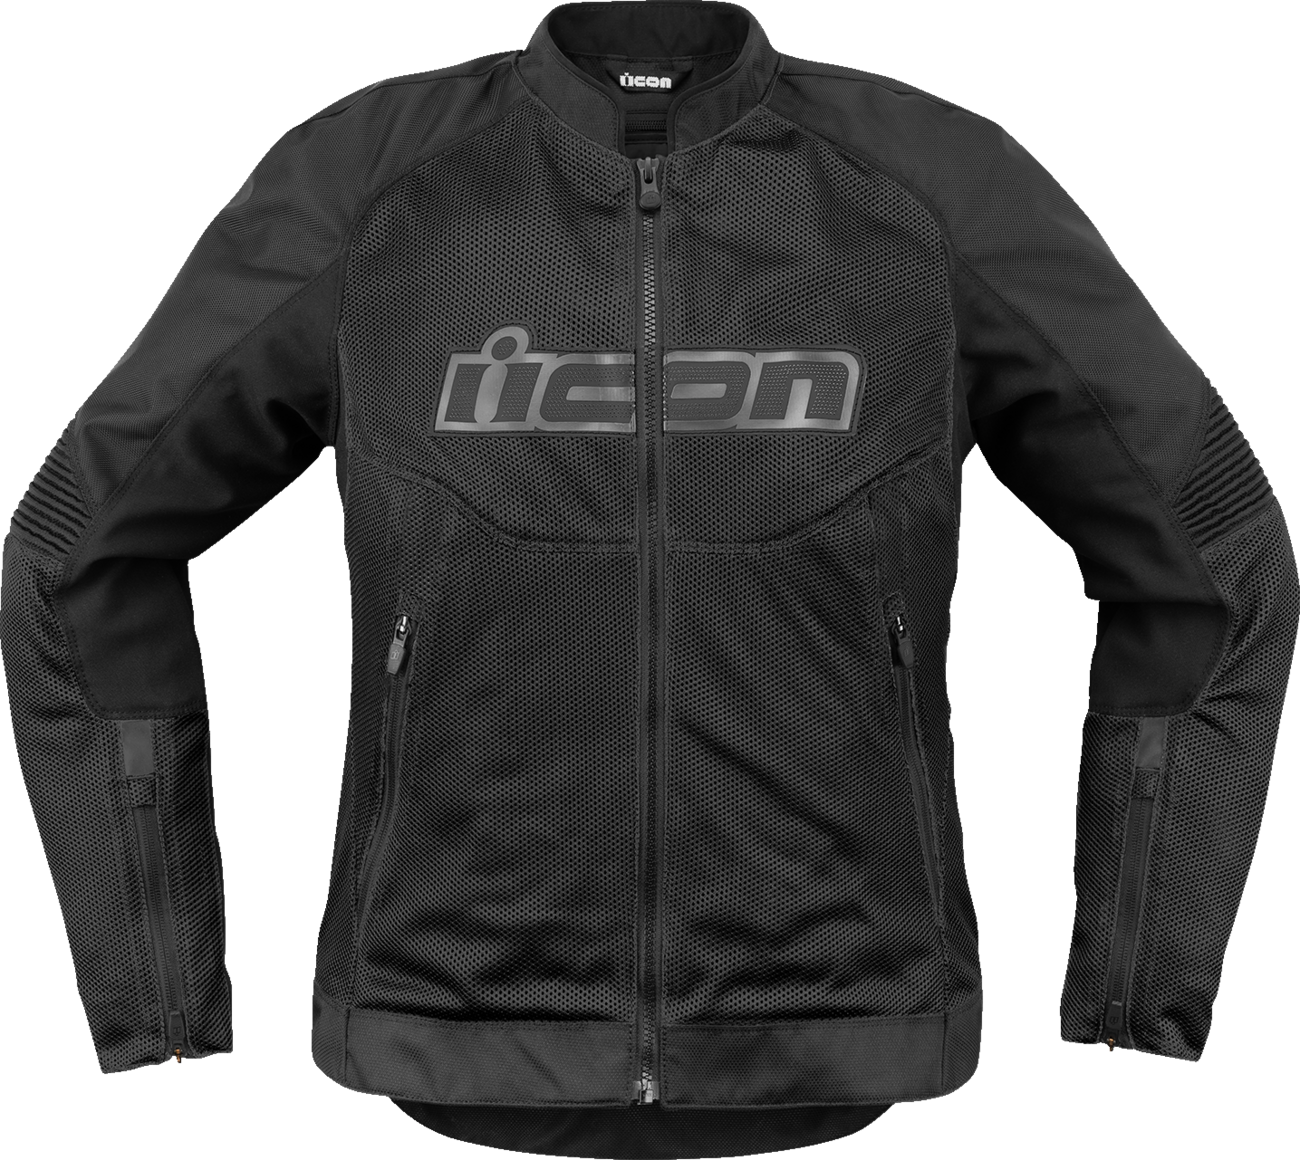 ICON Women's Overlord3 Mesh™ CE Jacket - Black - Large 2822-1582